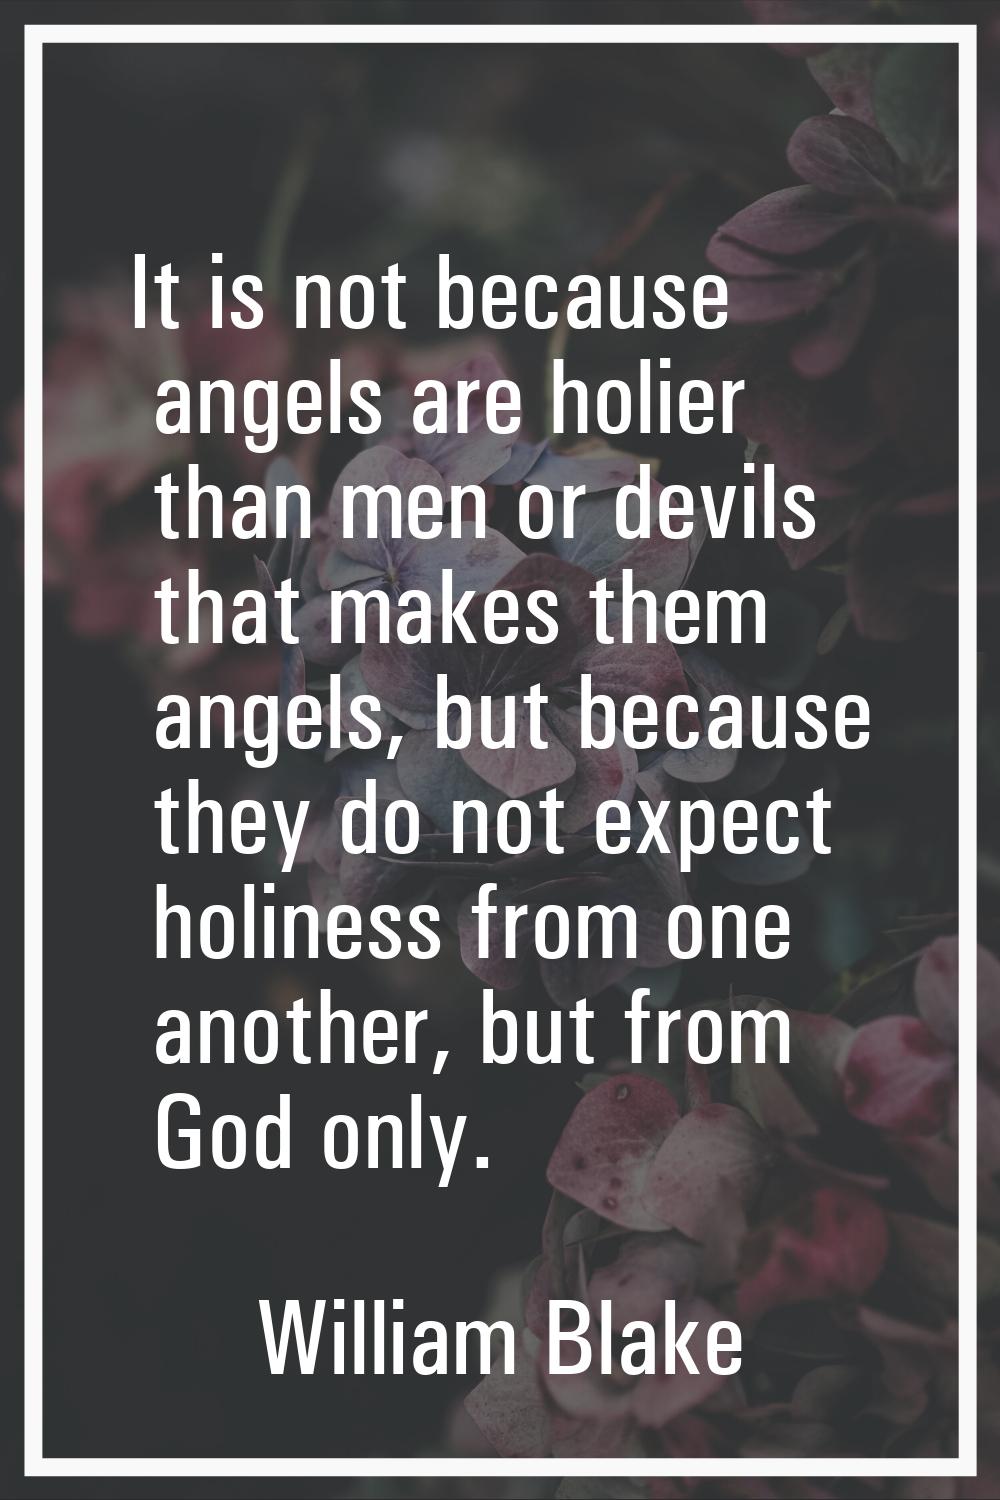 It is not because angels are holier than men or devils that makes them angels, but because they do 